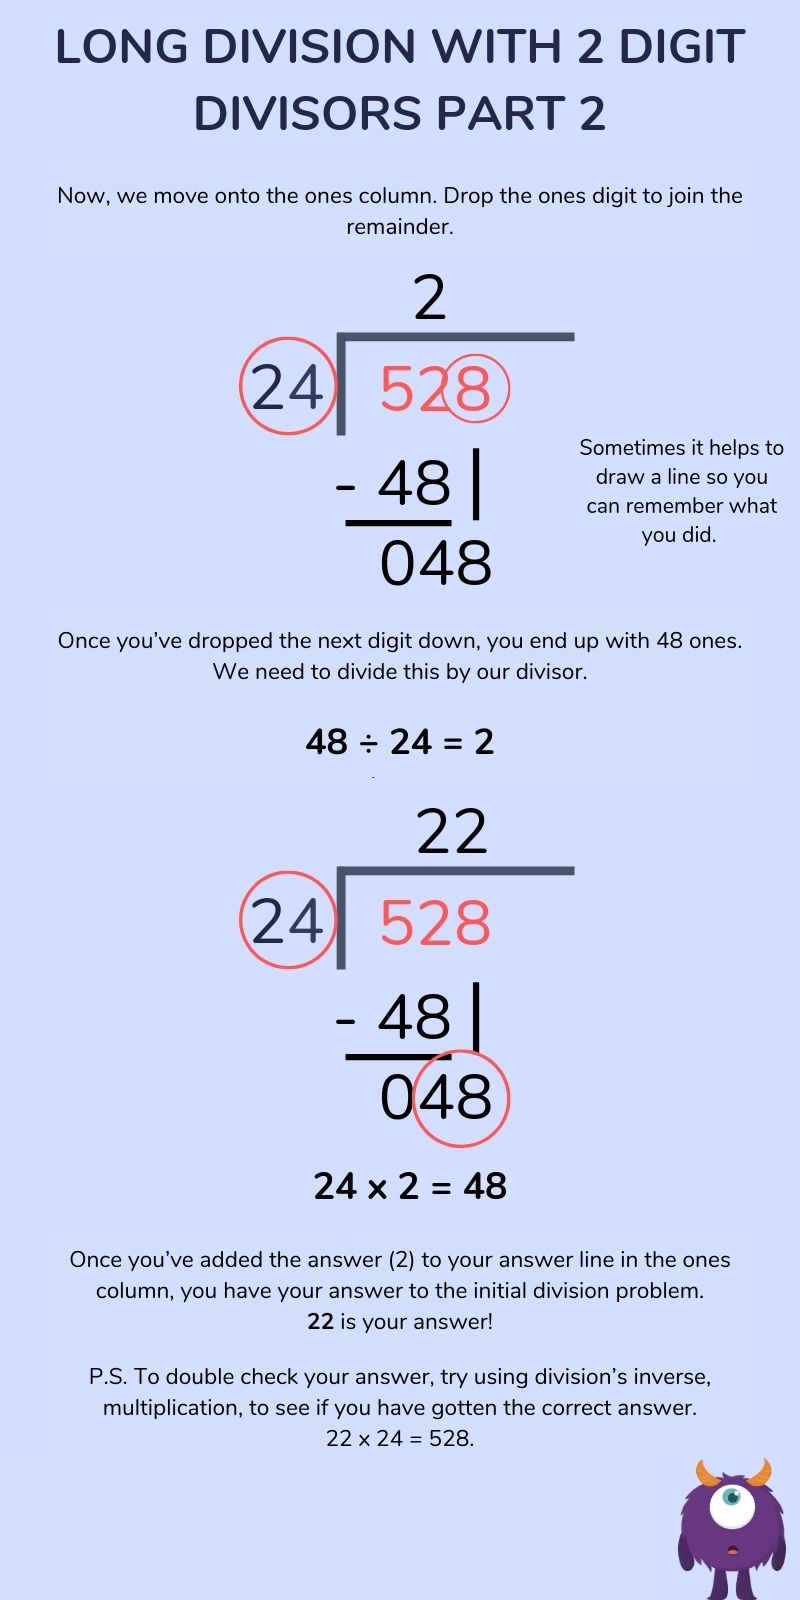 long division with 2 digit divisors part 2